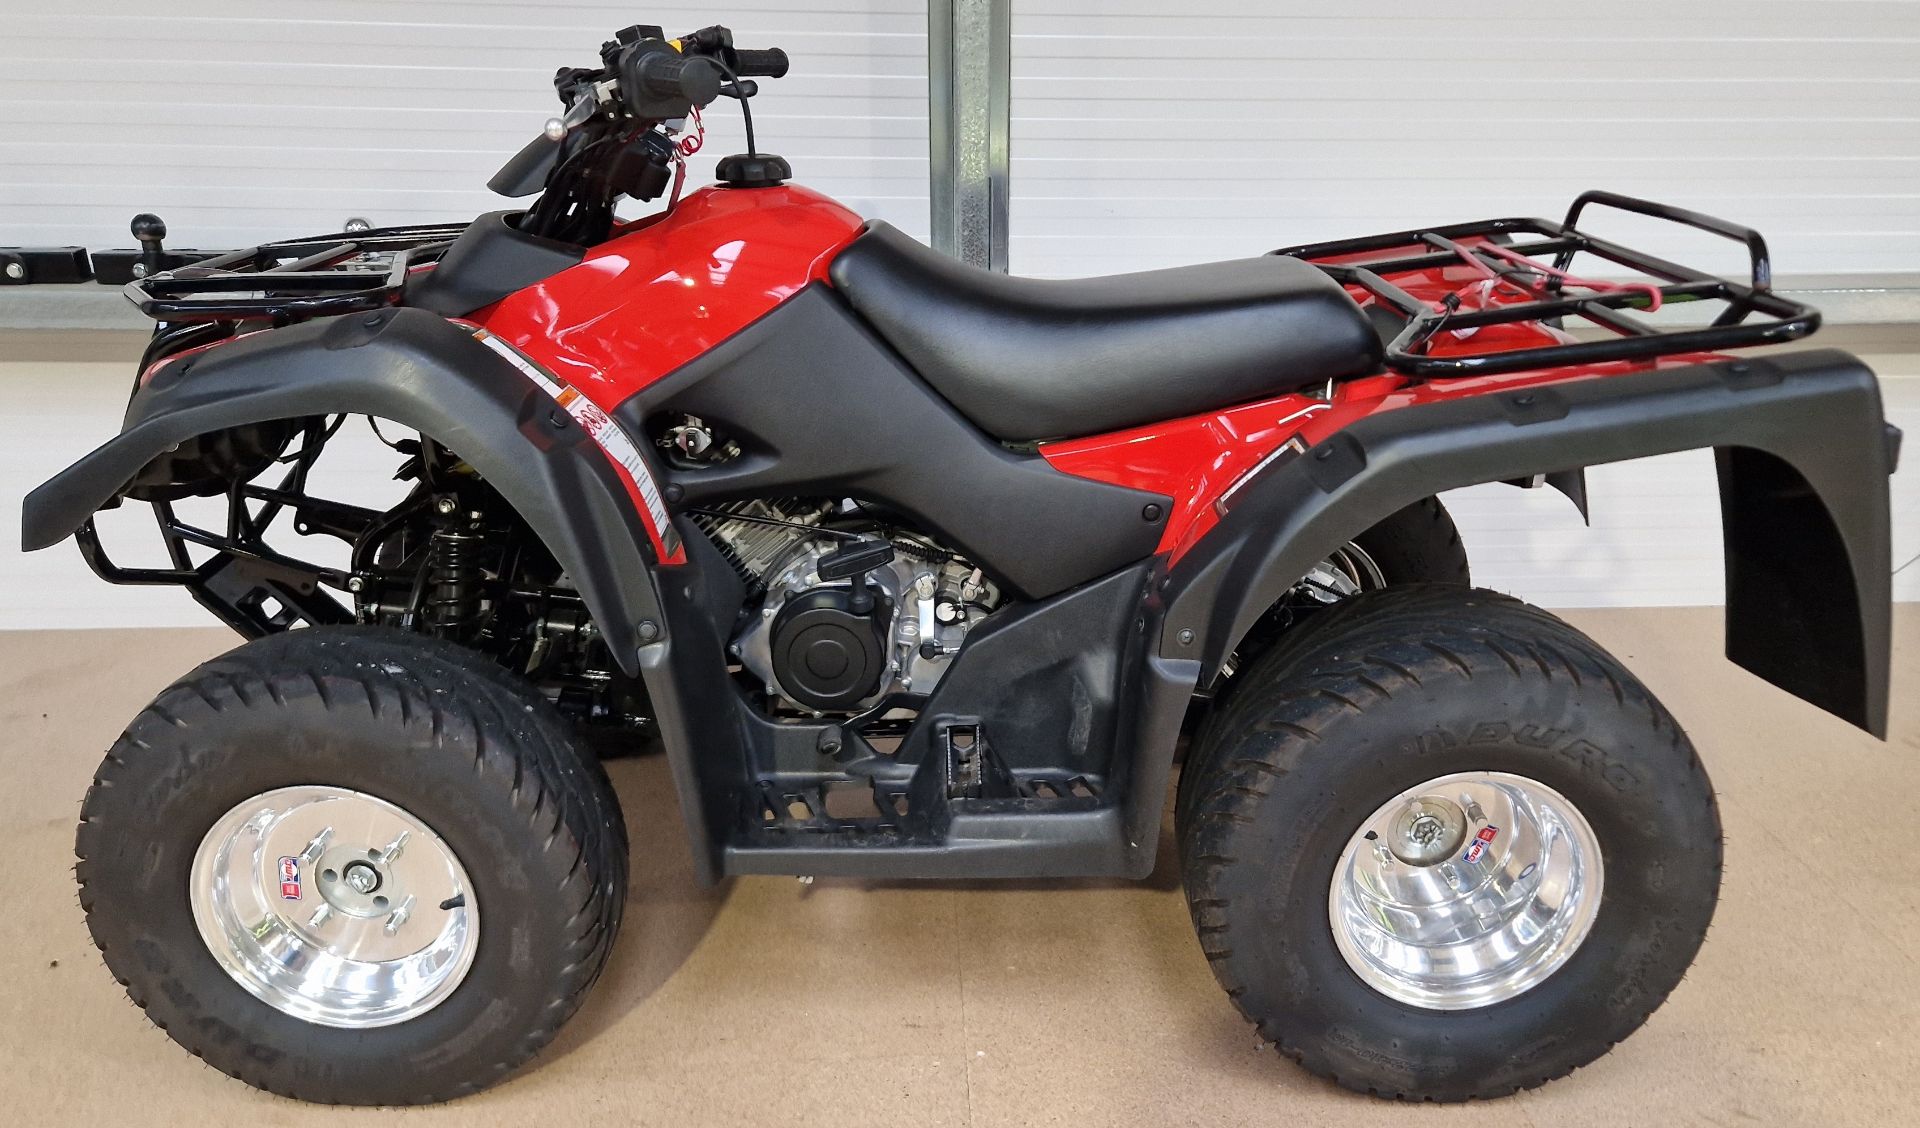 One SUZUKI LT-F250 Quad Bike with fitted Luggage Racks Front and Rear - Image 3 of 4